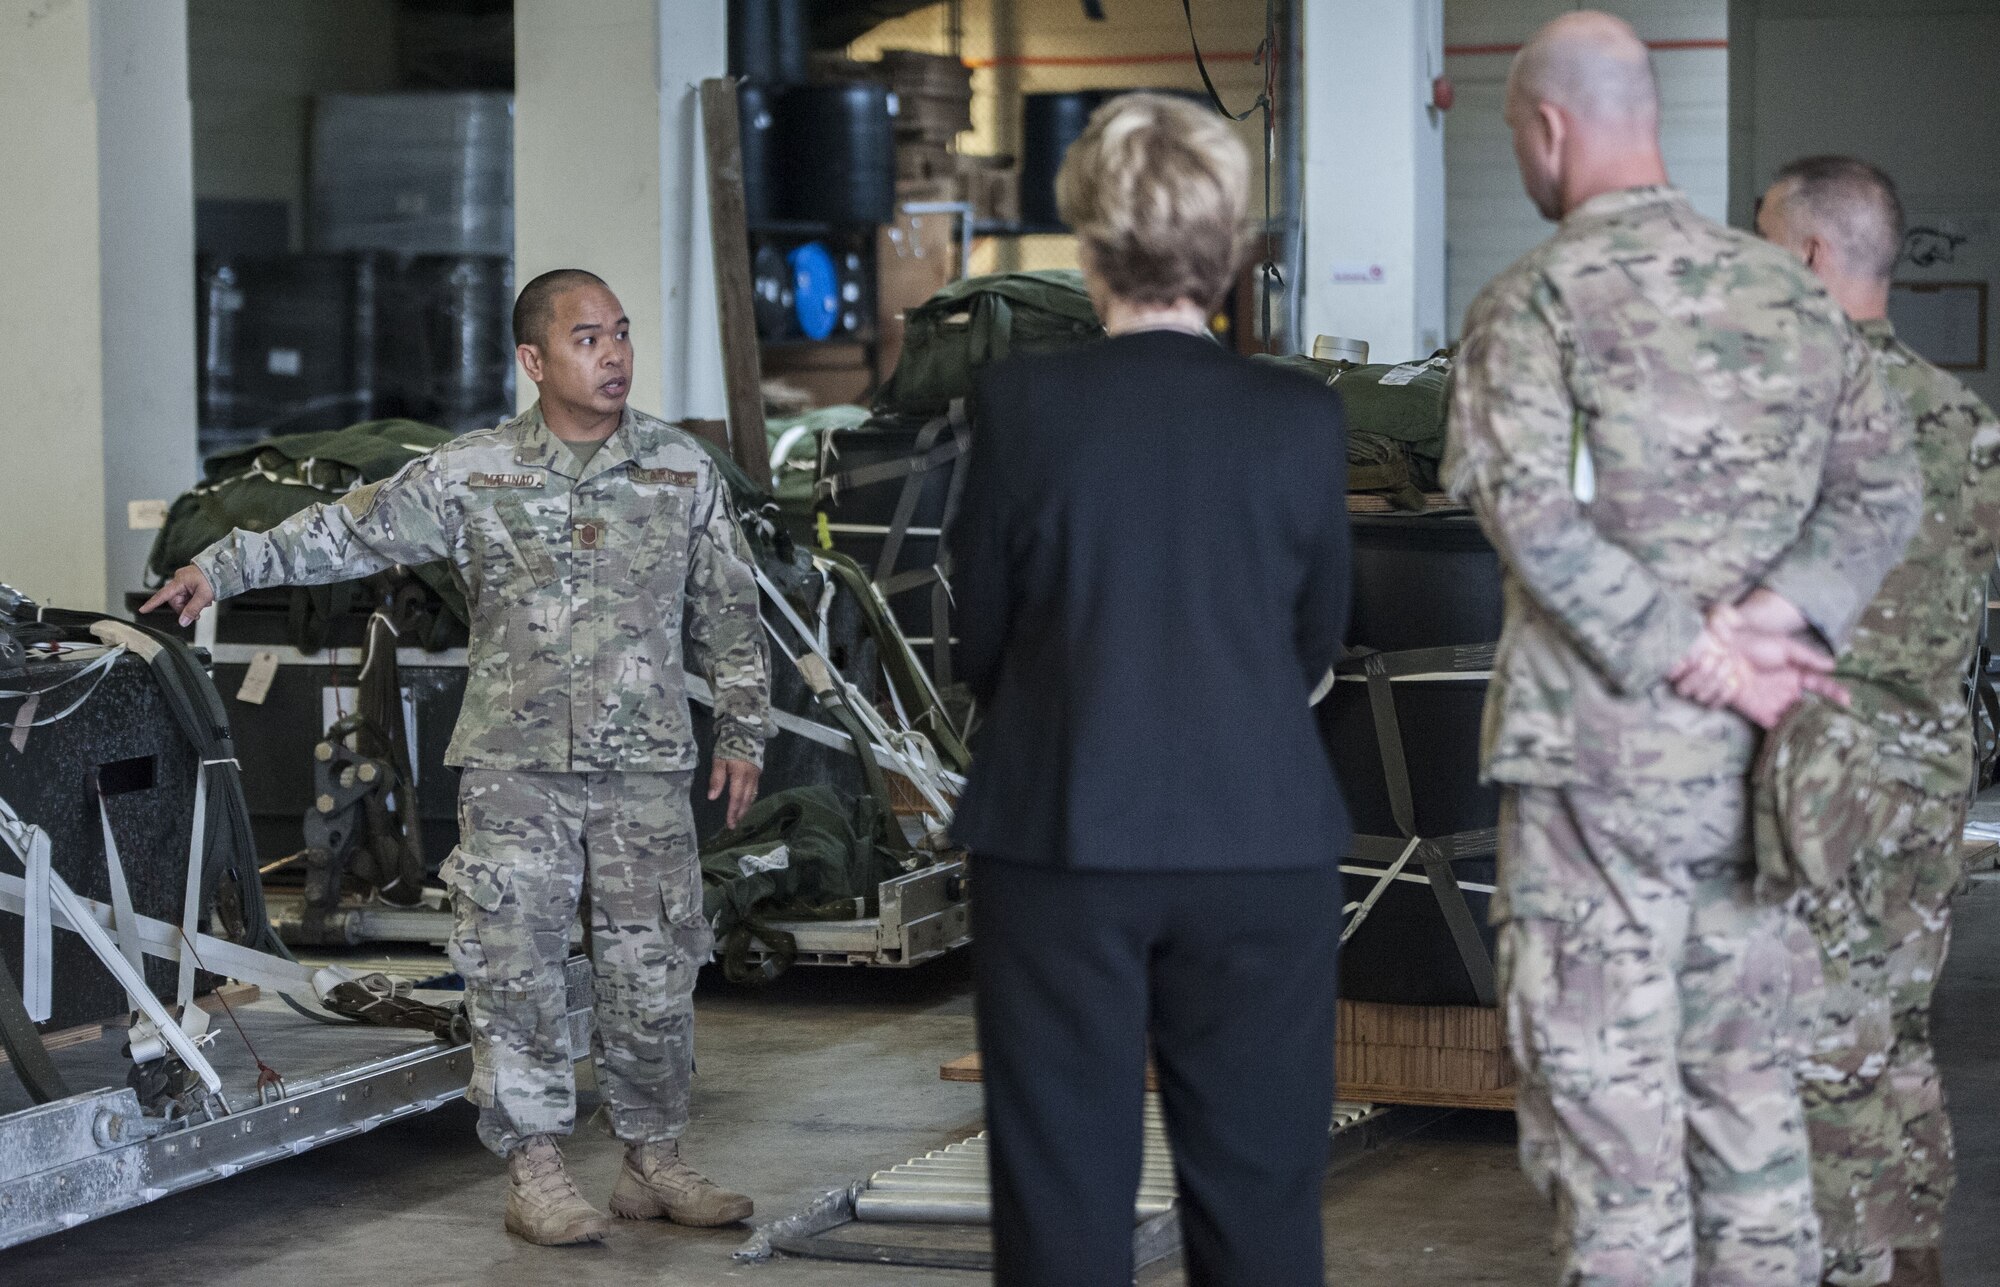 AFSOC staff visits the 353rd SOG